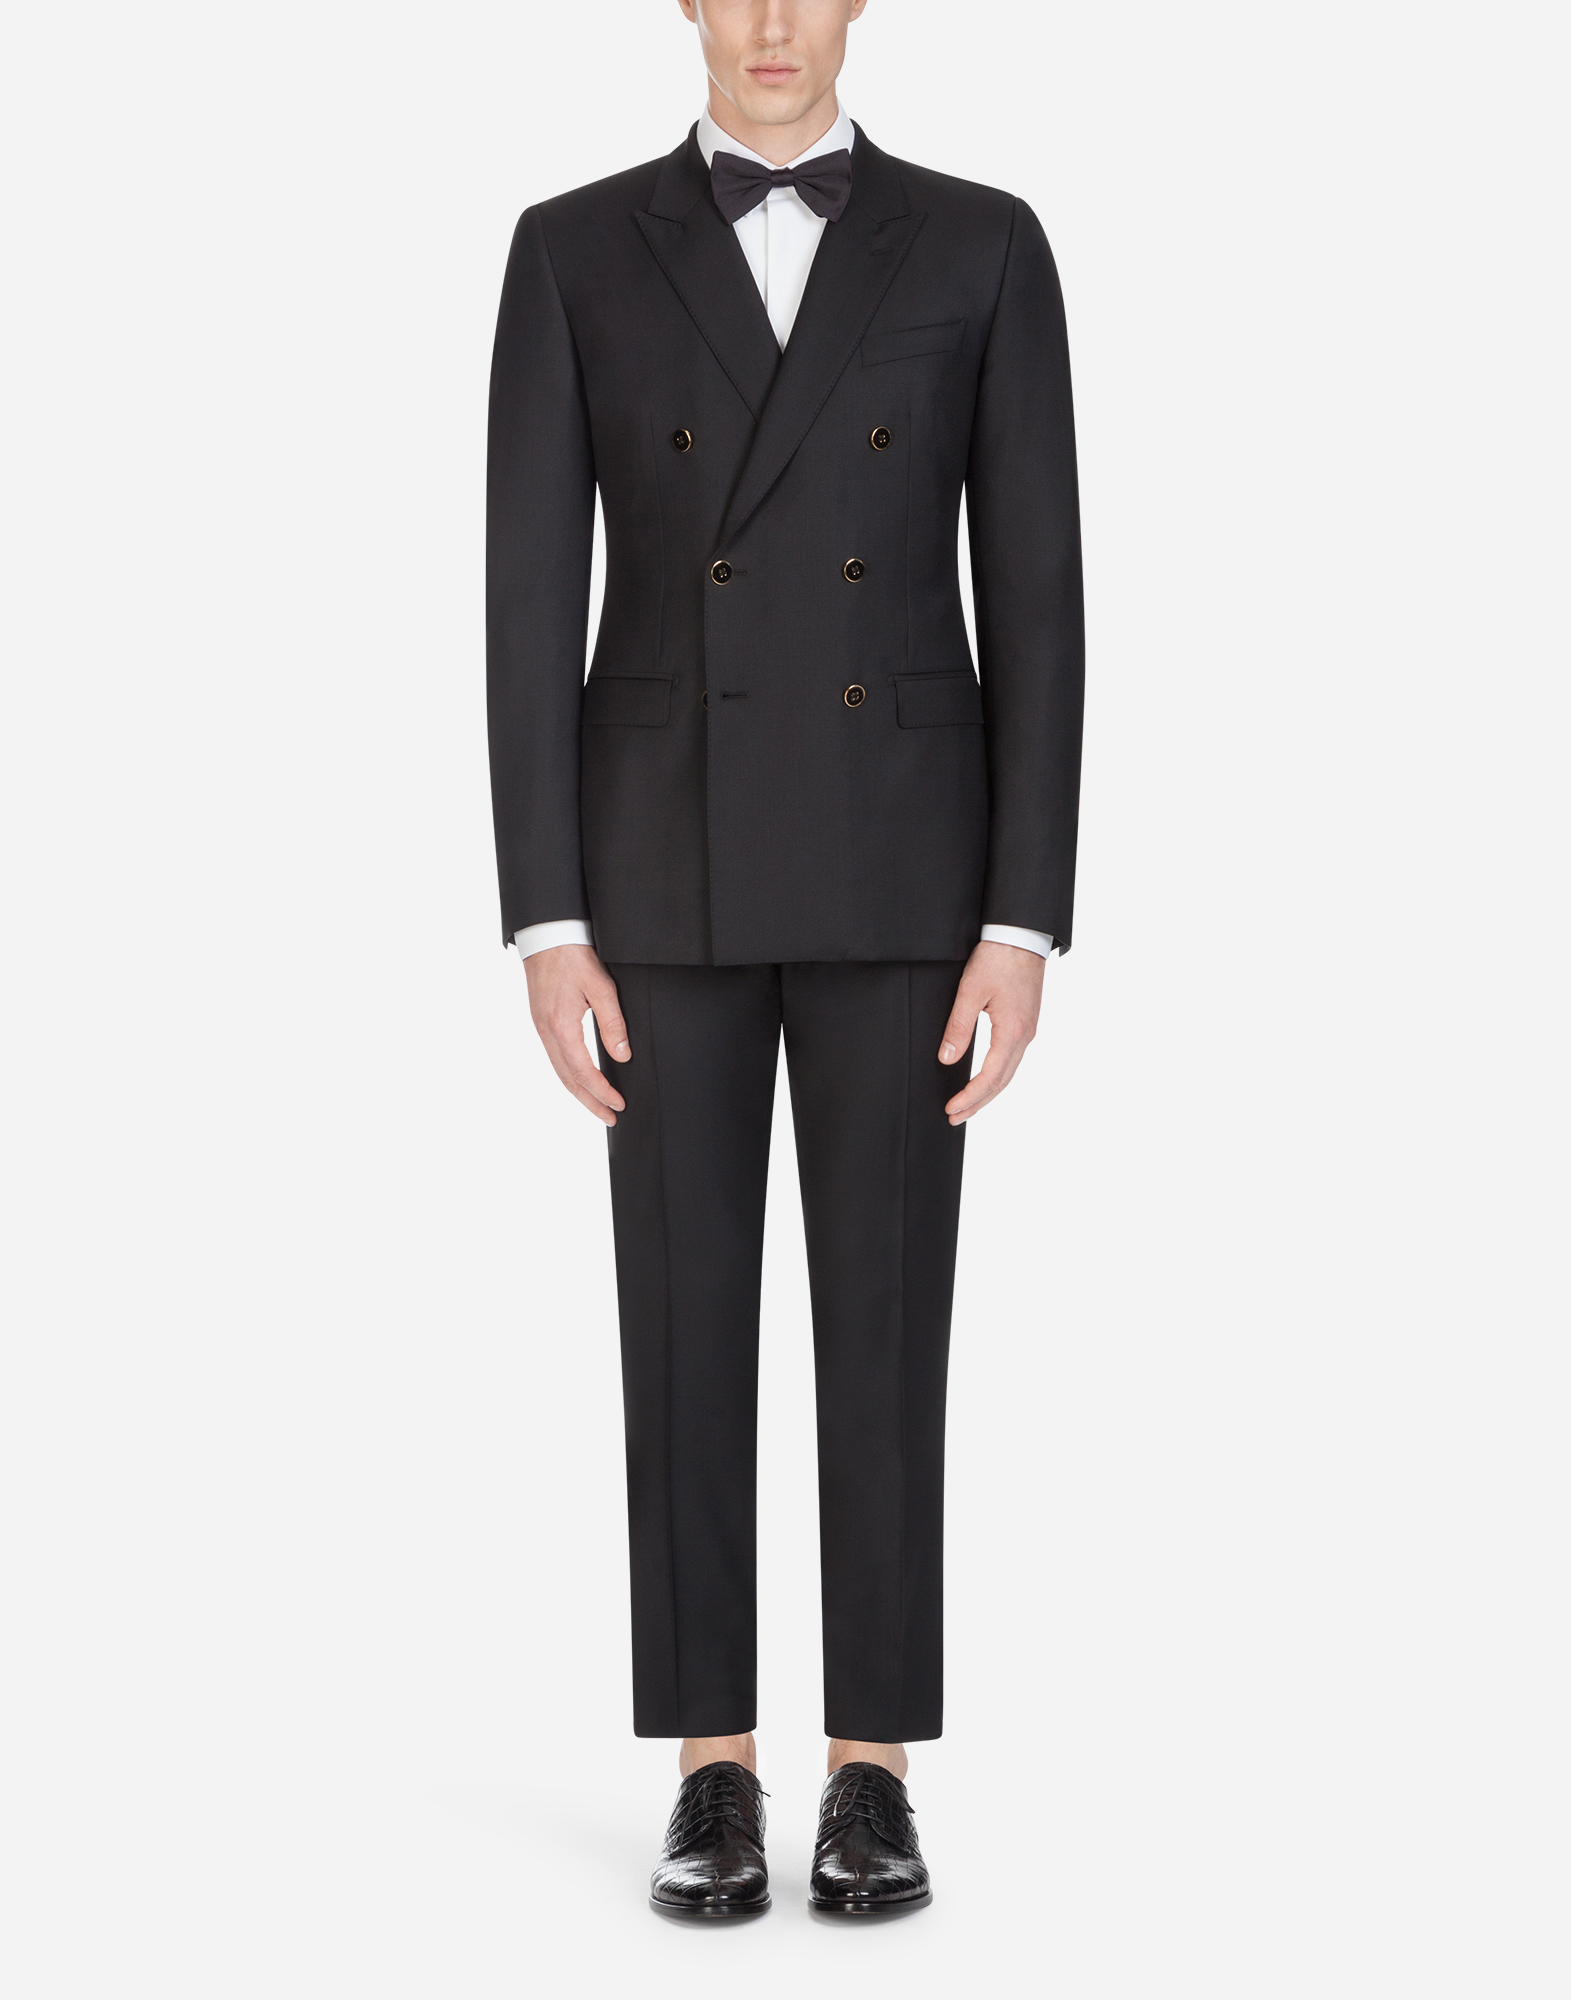 Martini suit in wool